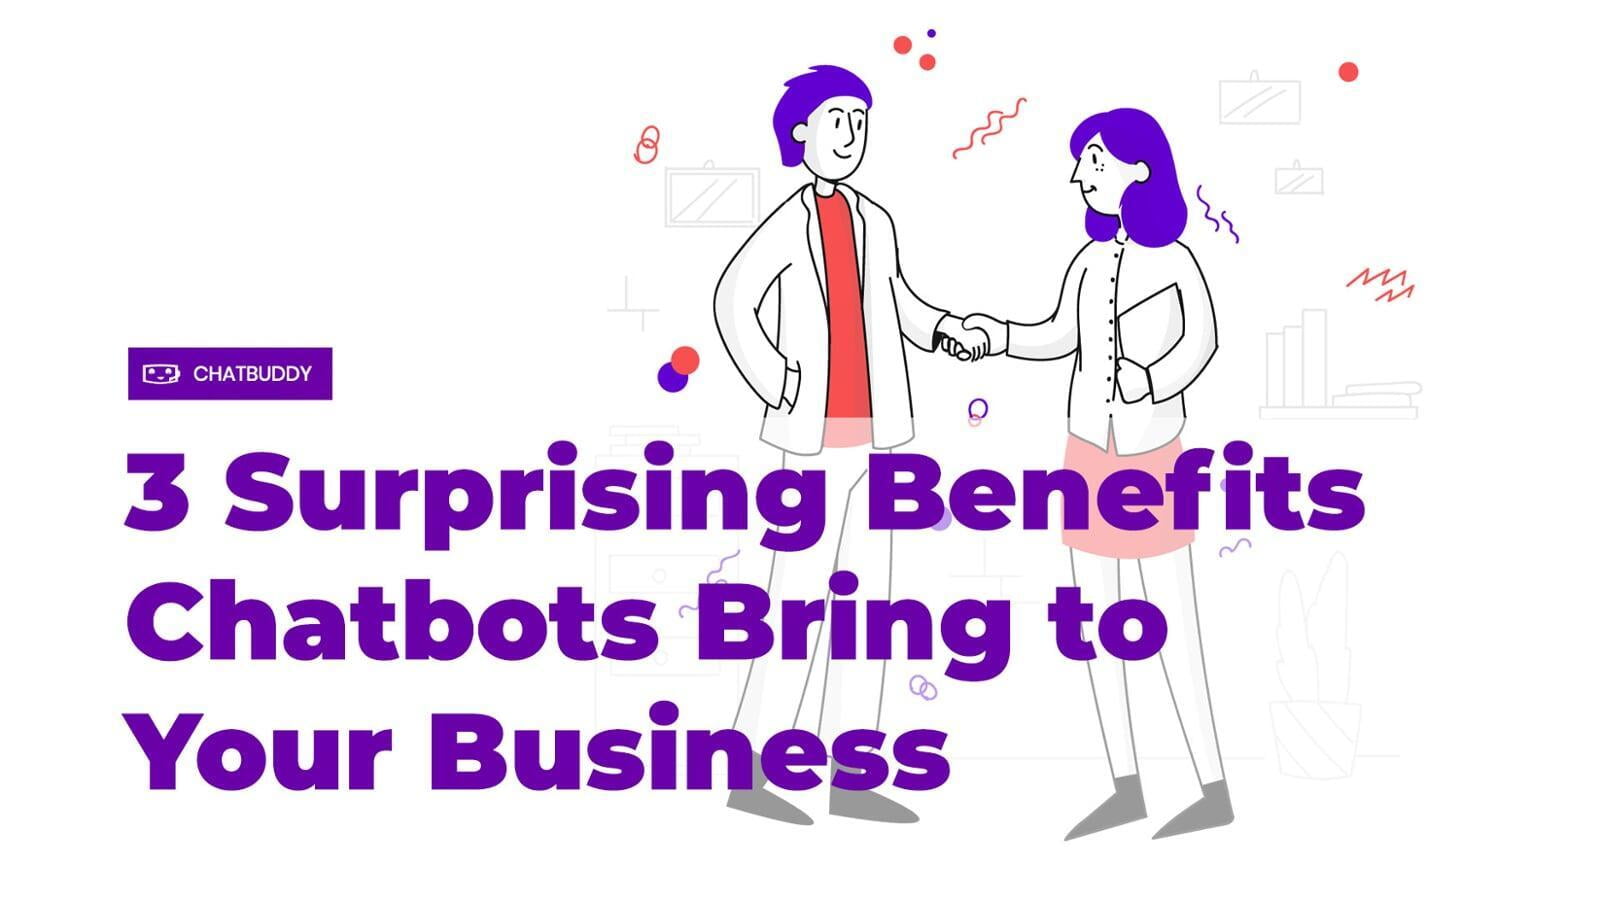 3 Surprising Benefits Chatbots Bring to Your Business